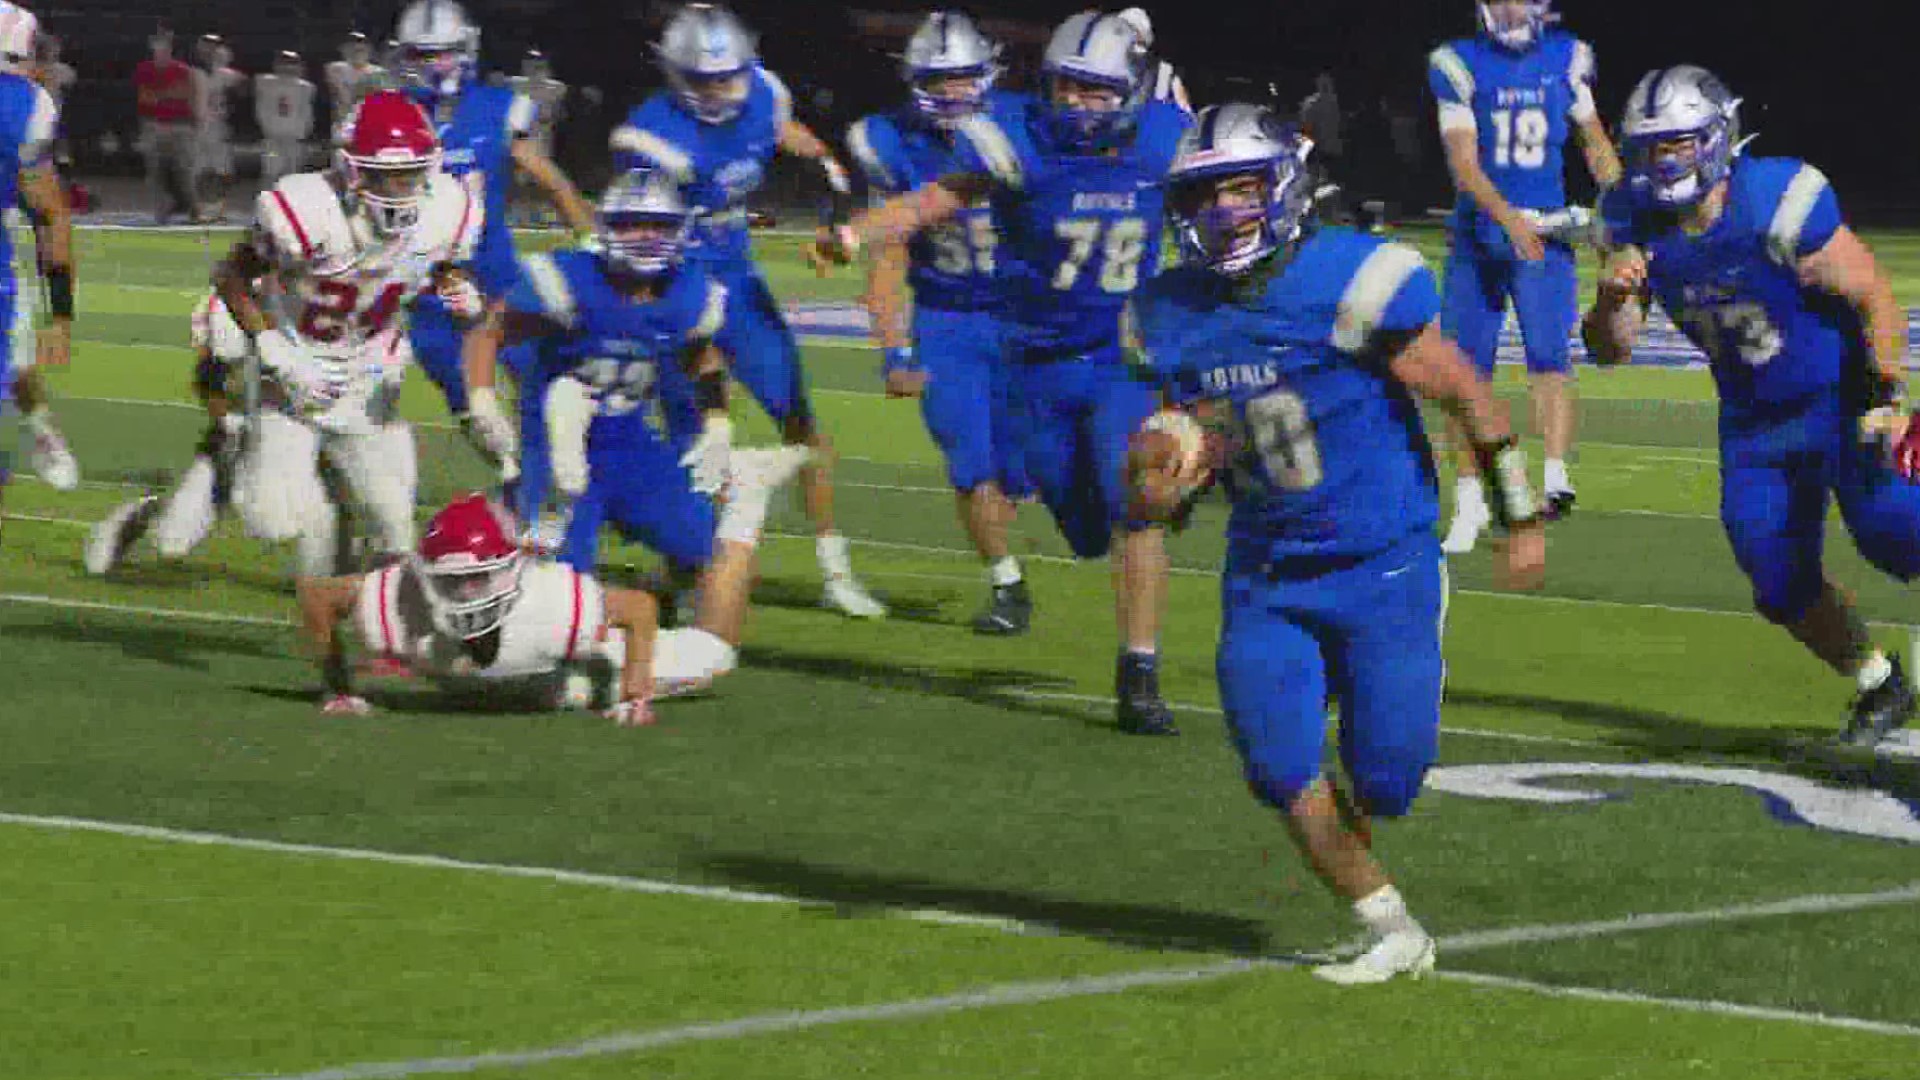 Hamilton Southeastern topped Fishers in the Mudsock Game Friday night.